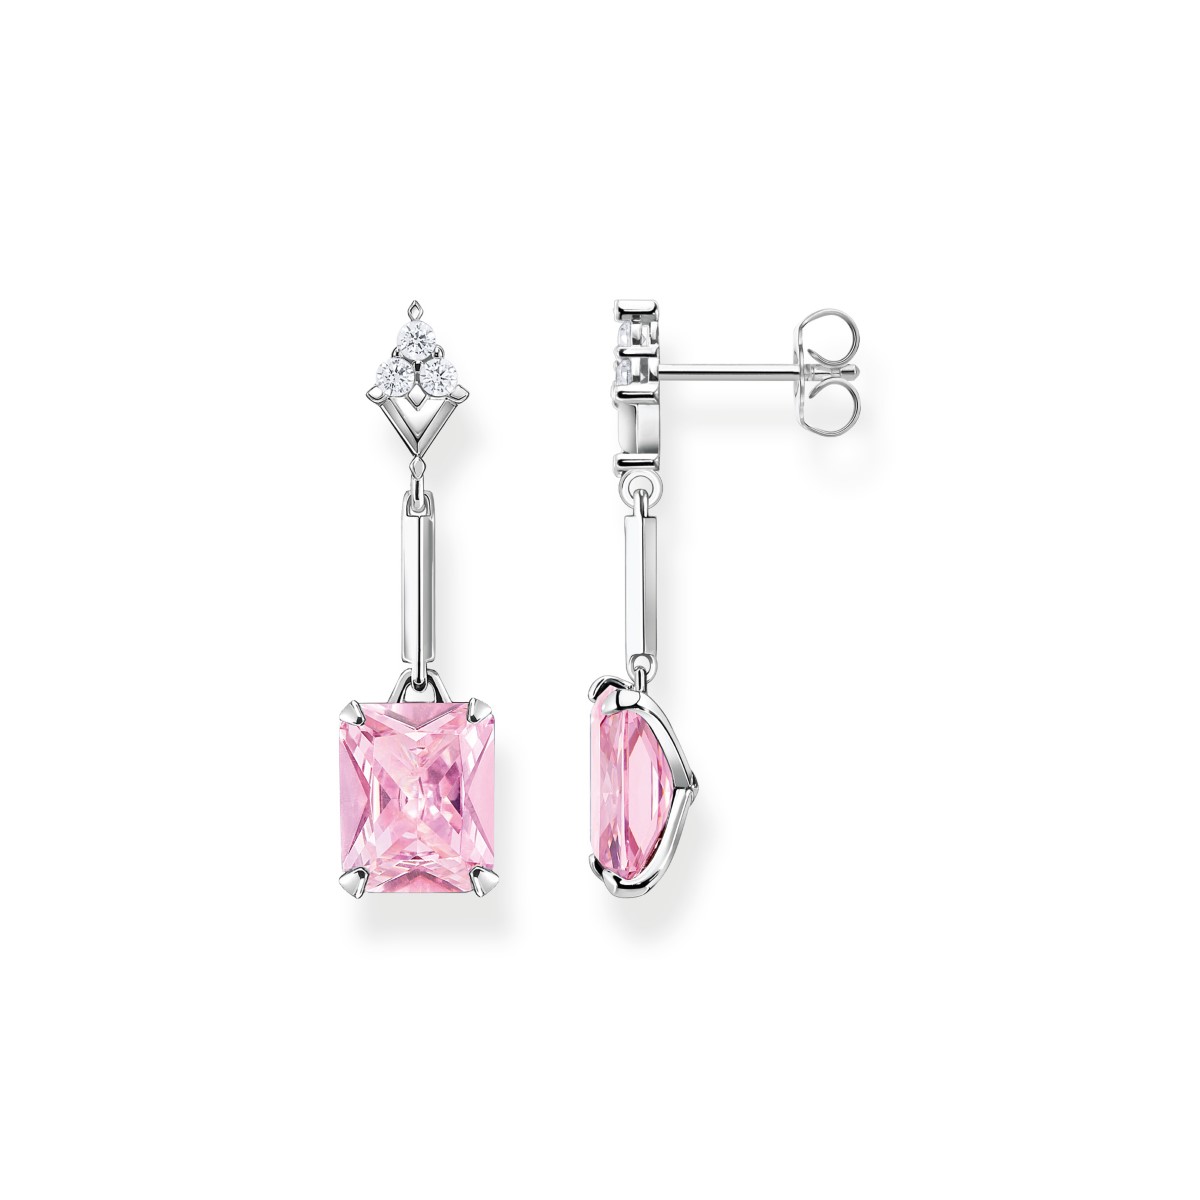 Photos - Earrings Thomas Sabo Pink Octagon Cut and White Zirconia Drop  